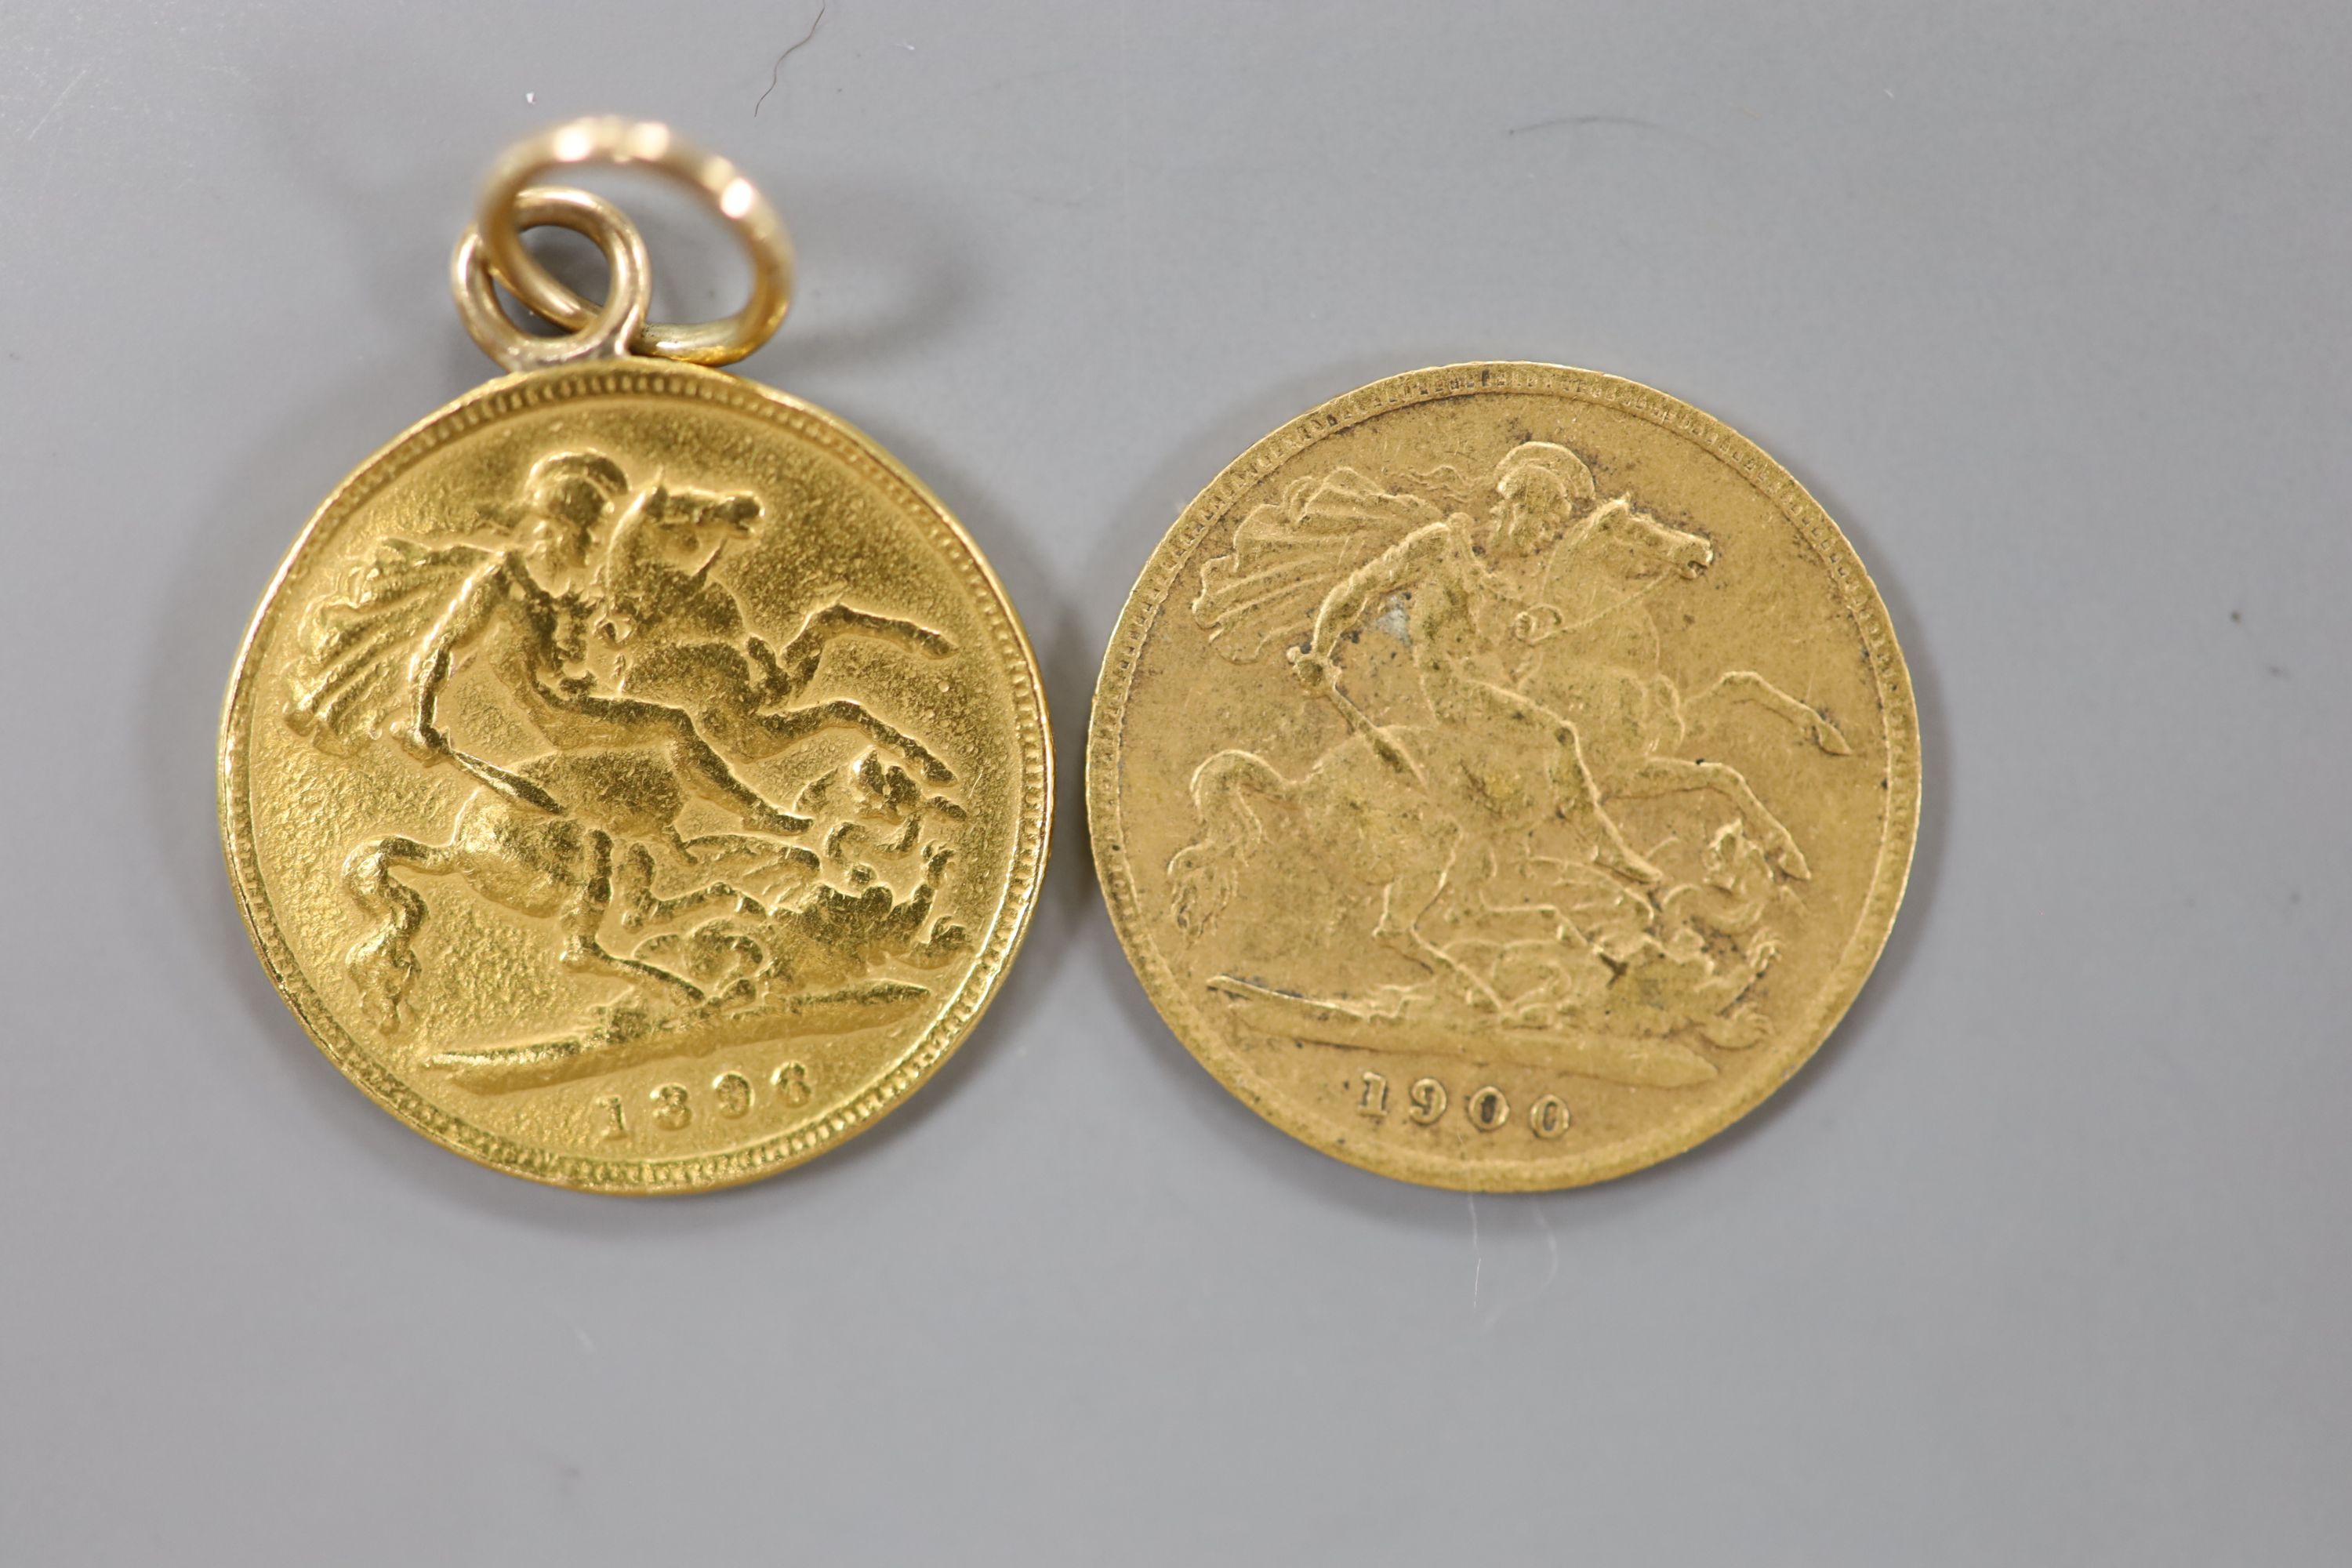 Two half sovereigns, 1896 (ring suspension) and 1900